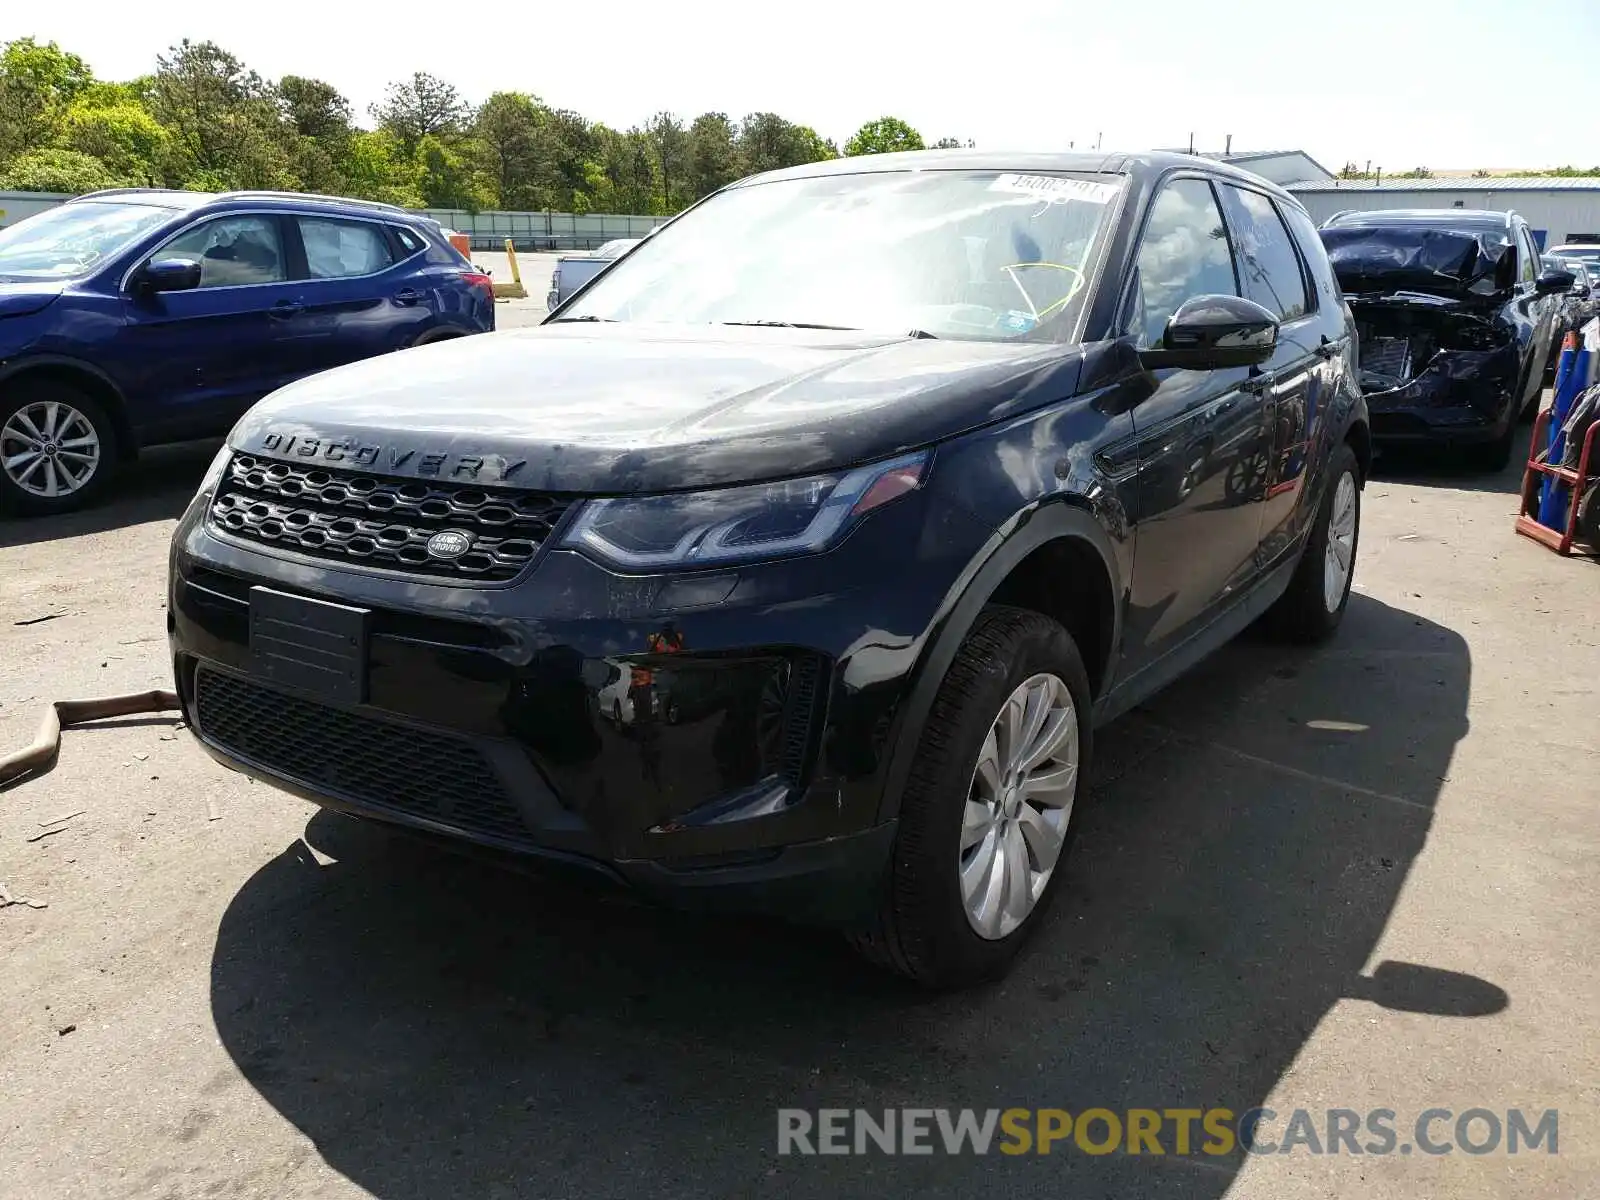 2 Photograph of a damaged car SALCP2FX6LH846169 LAND ROVER DISCOVERY 2020